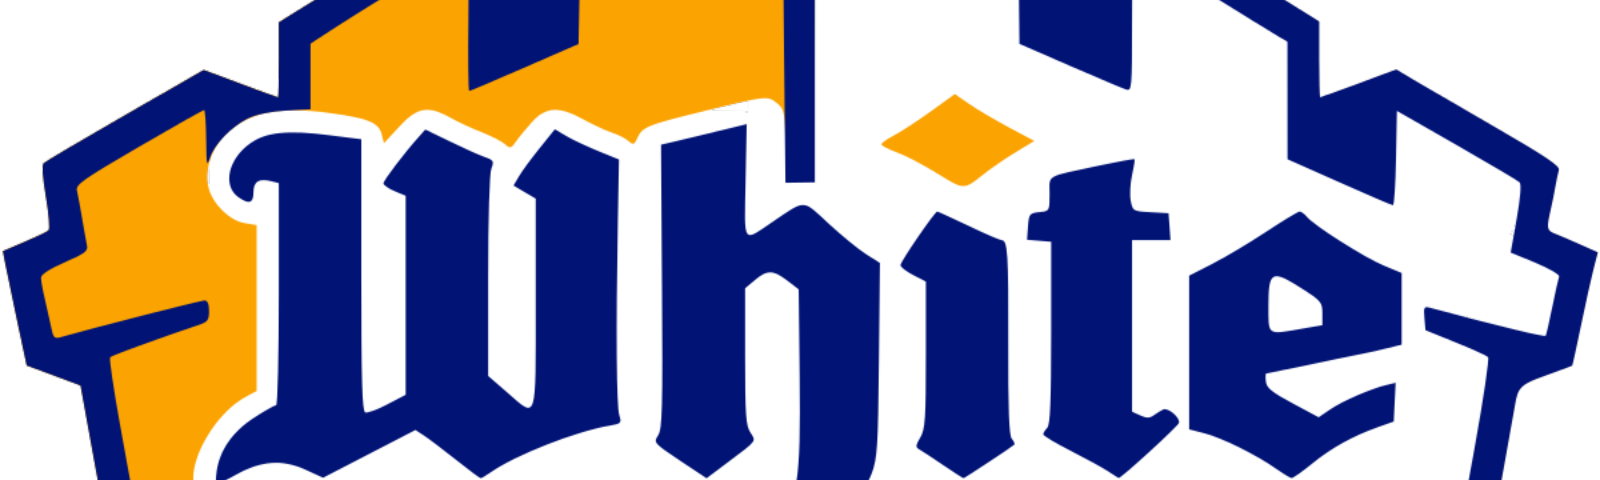 Is White Castle A Shithole And What Does That Have - Is White Castle A Shithole And What Does That Have (1600x480)